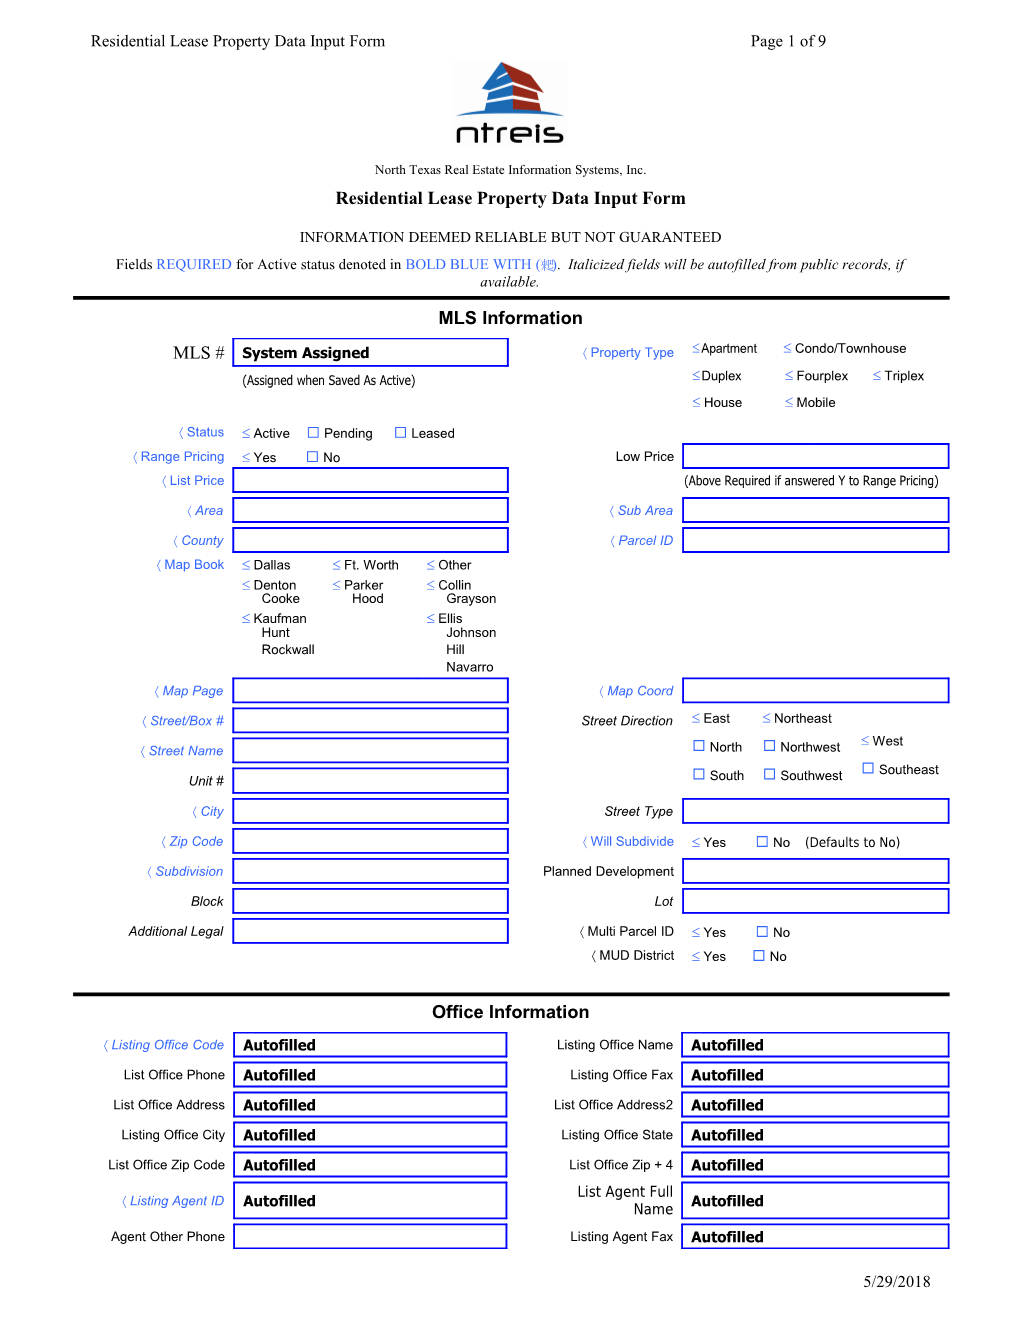 Residential Lease Property Data Input Form Page 1 of 8